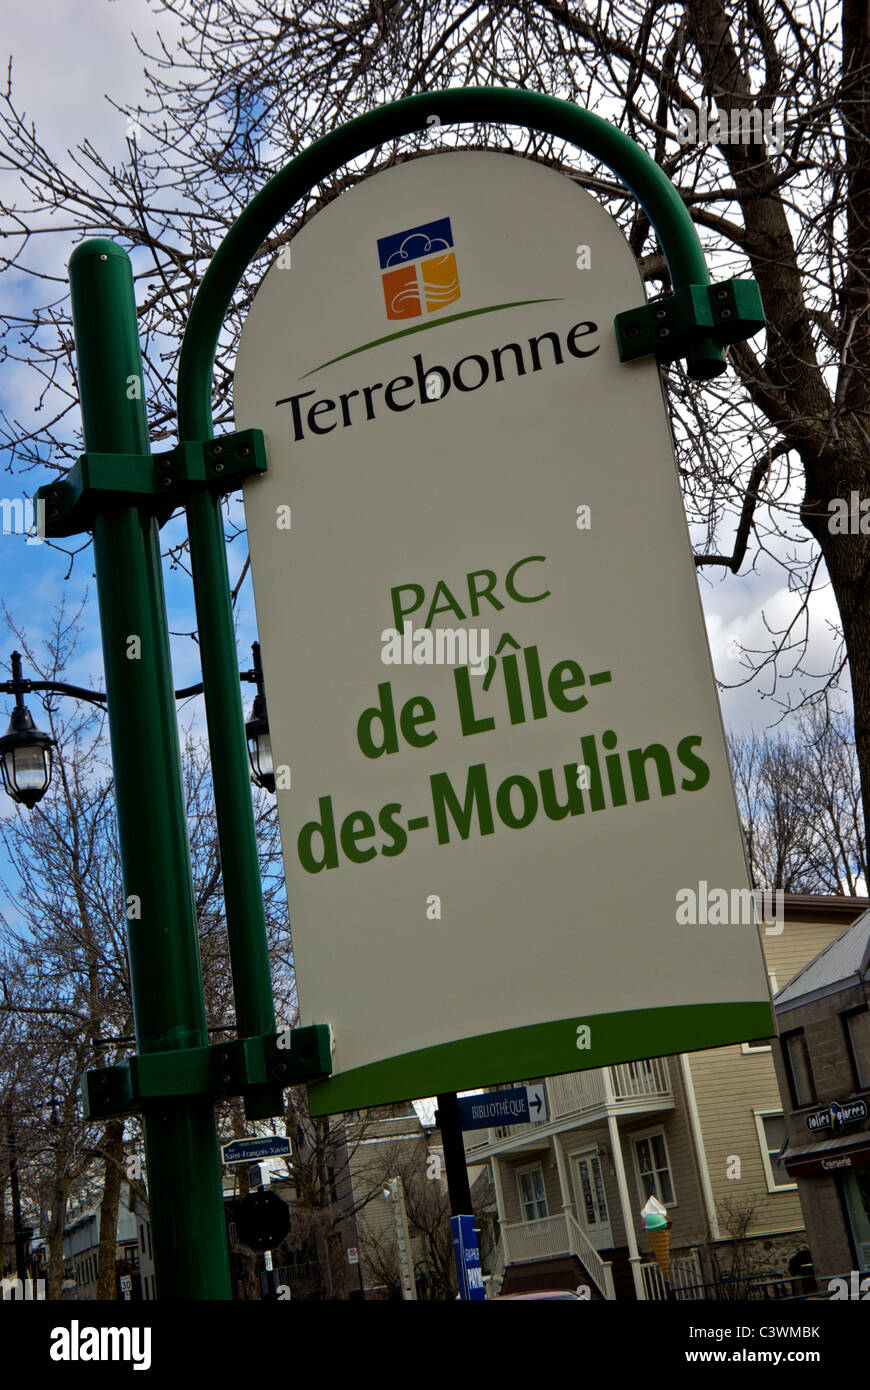 Entrance direction sign to L'Ile-des-Moulins museum park in village of Terrebonne in Lanaudiere region of Quebec Canada Stock Photo